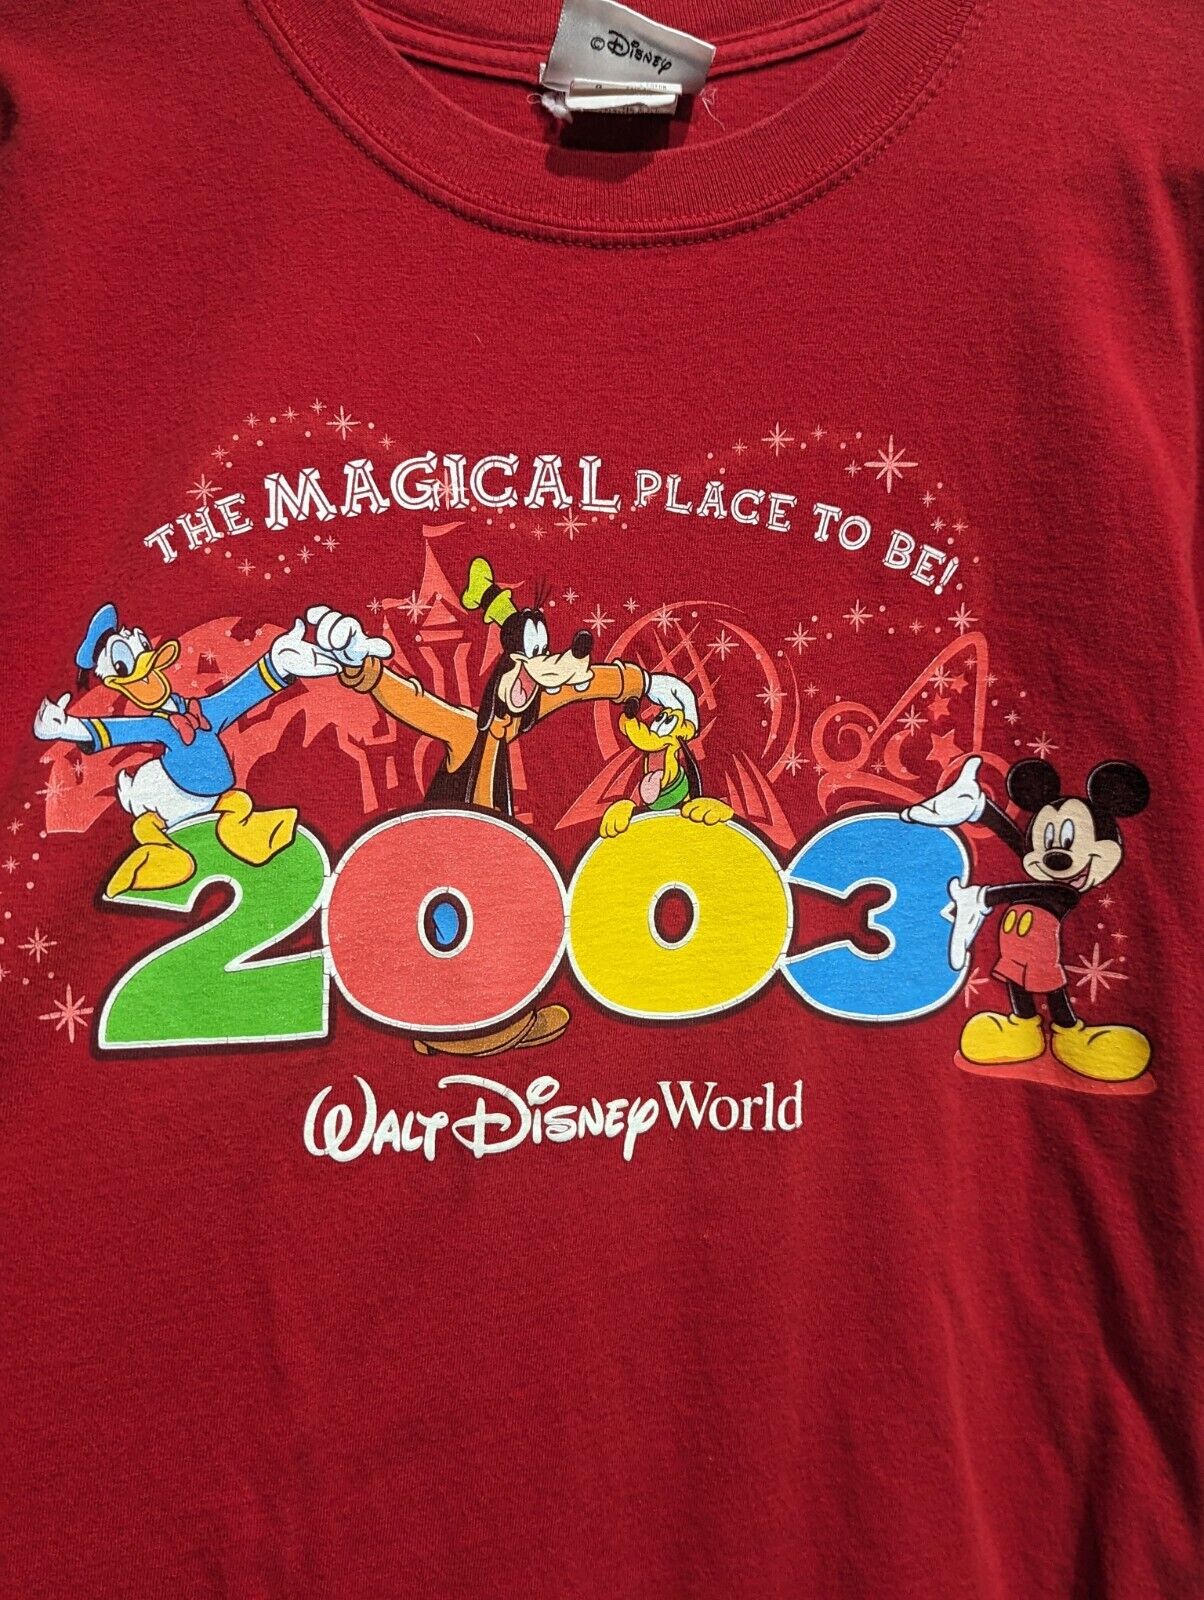 VINTAGE Walt Disney World 2003 Magical Place to Be,Donald,Goofy Graphic Tee Lrge